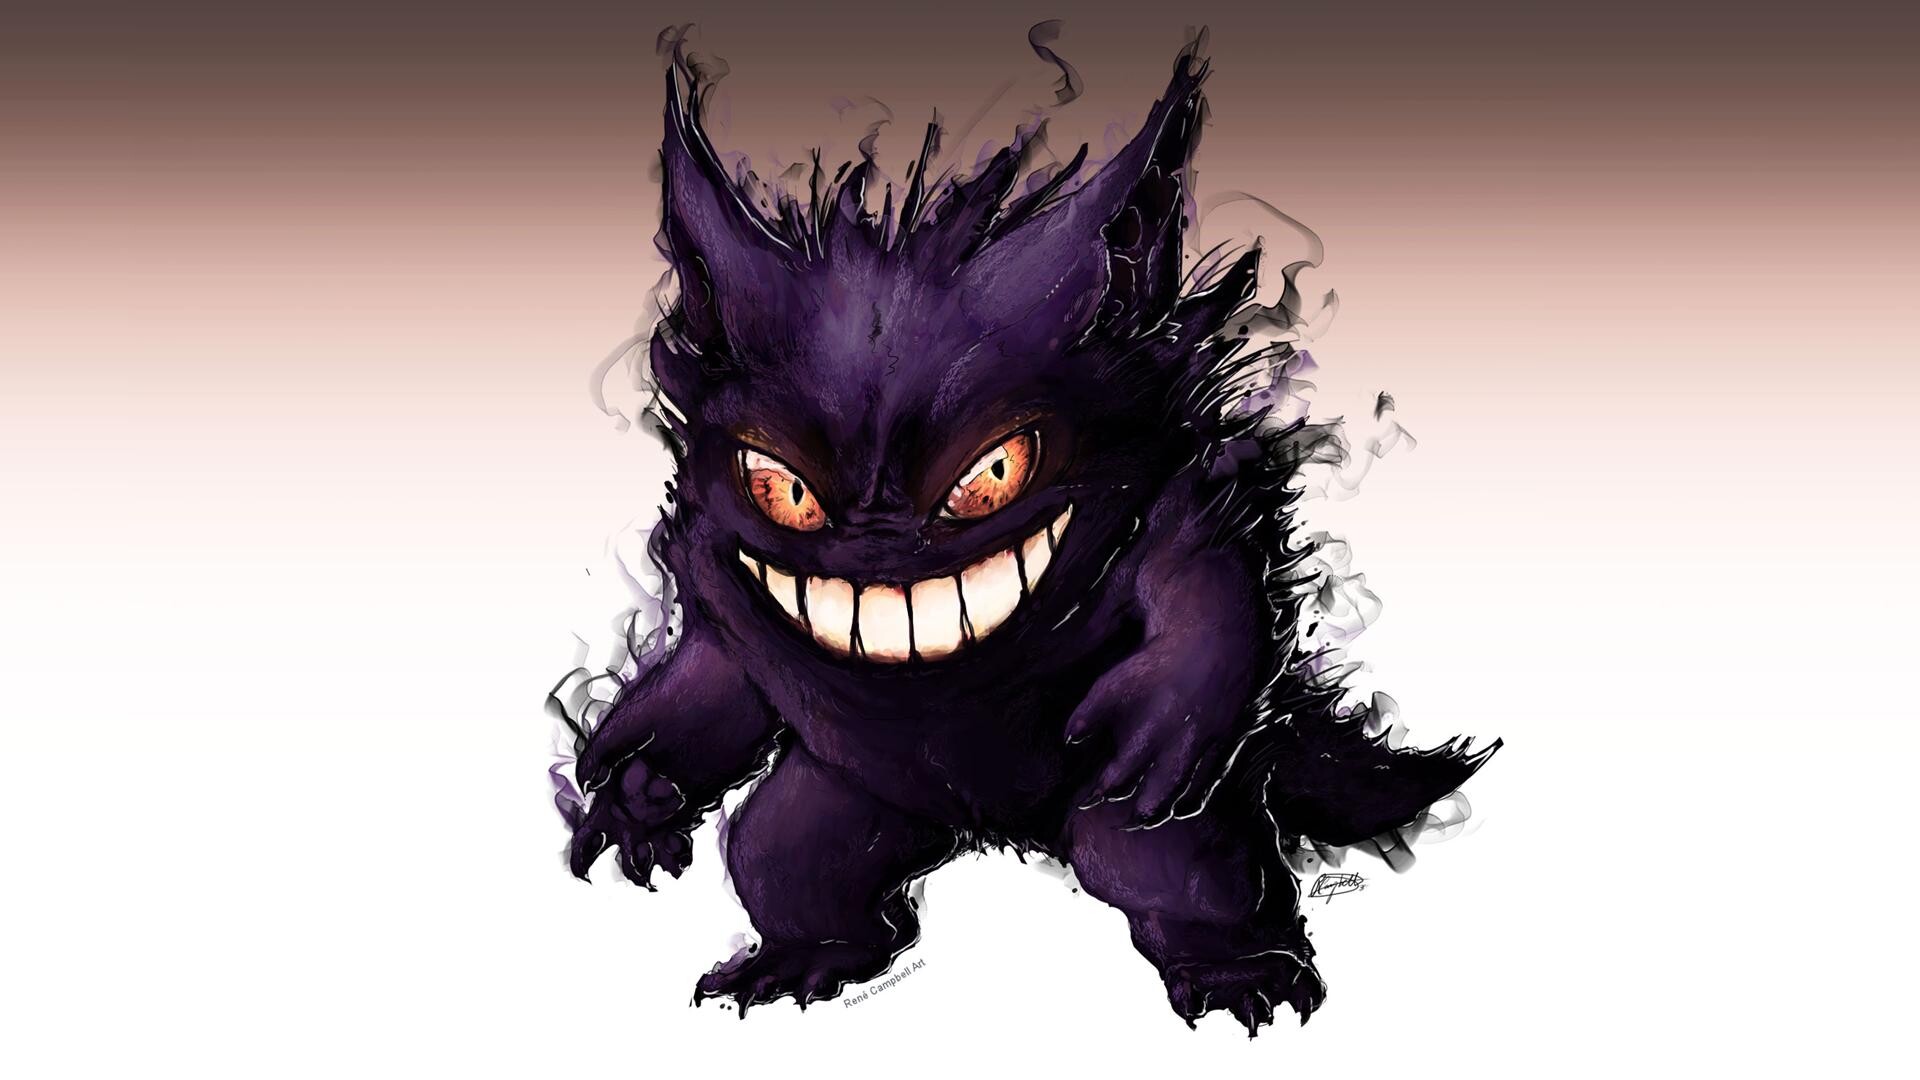 Gengar: Pokemon franchise, Fictional creatures, The Trainers catching and training Pokémon. 1920x1080 Full HD Wallpaper.